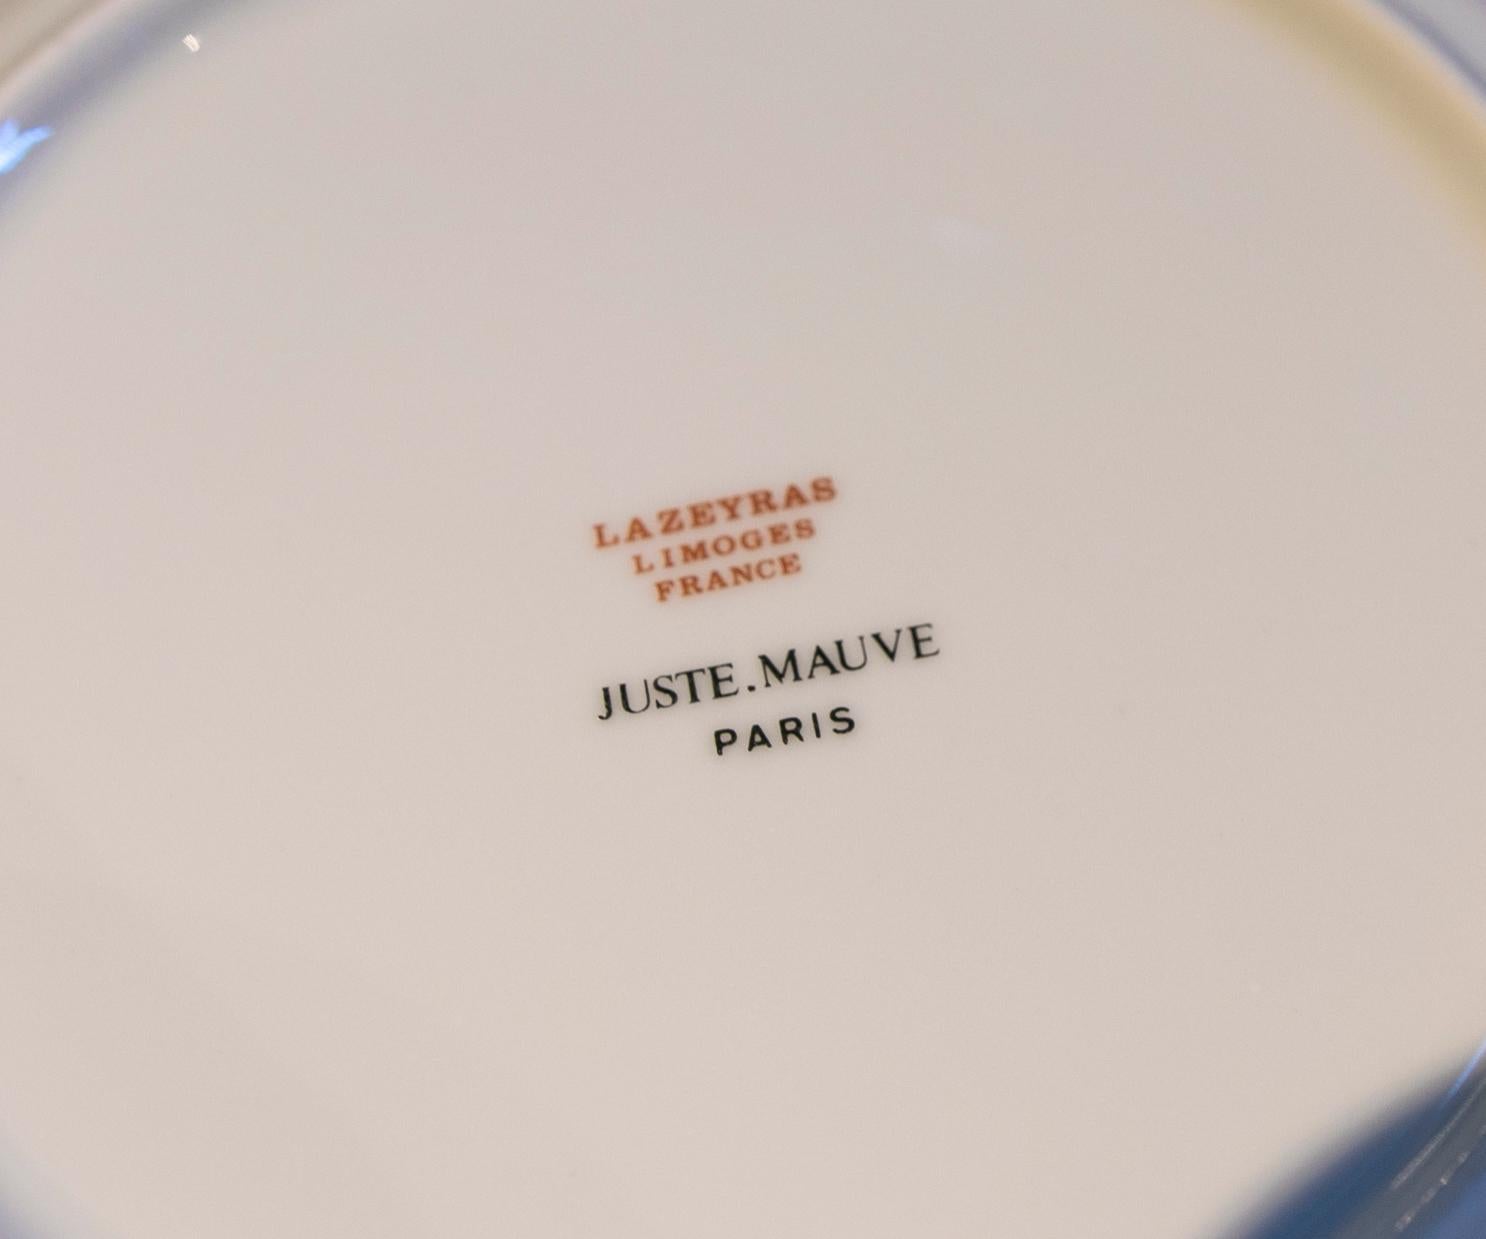 LIMOGES tableware. France, XX century. Juste-Mauve model. Marbella Club Hotel  For Sale 10